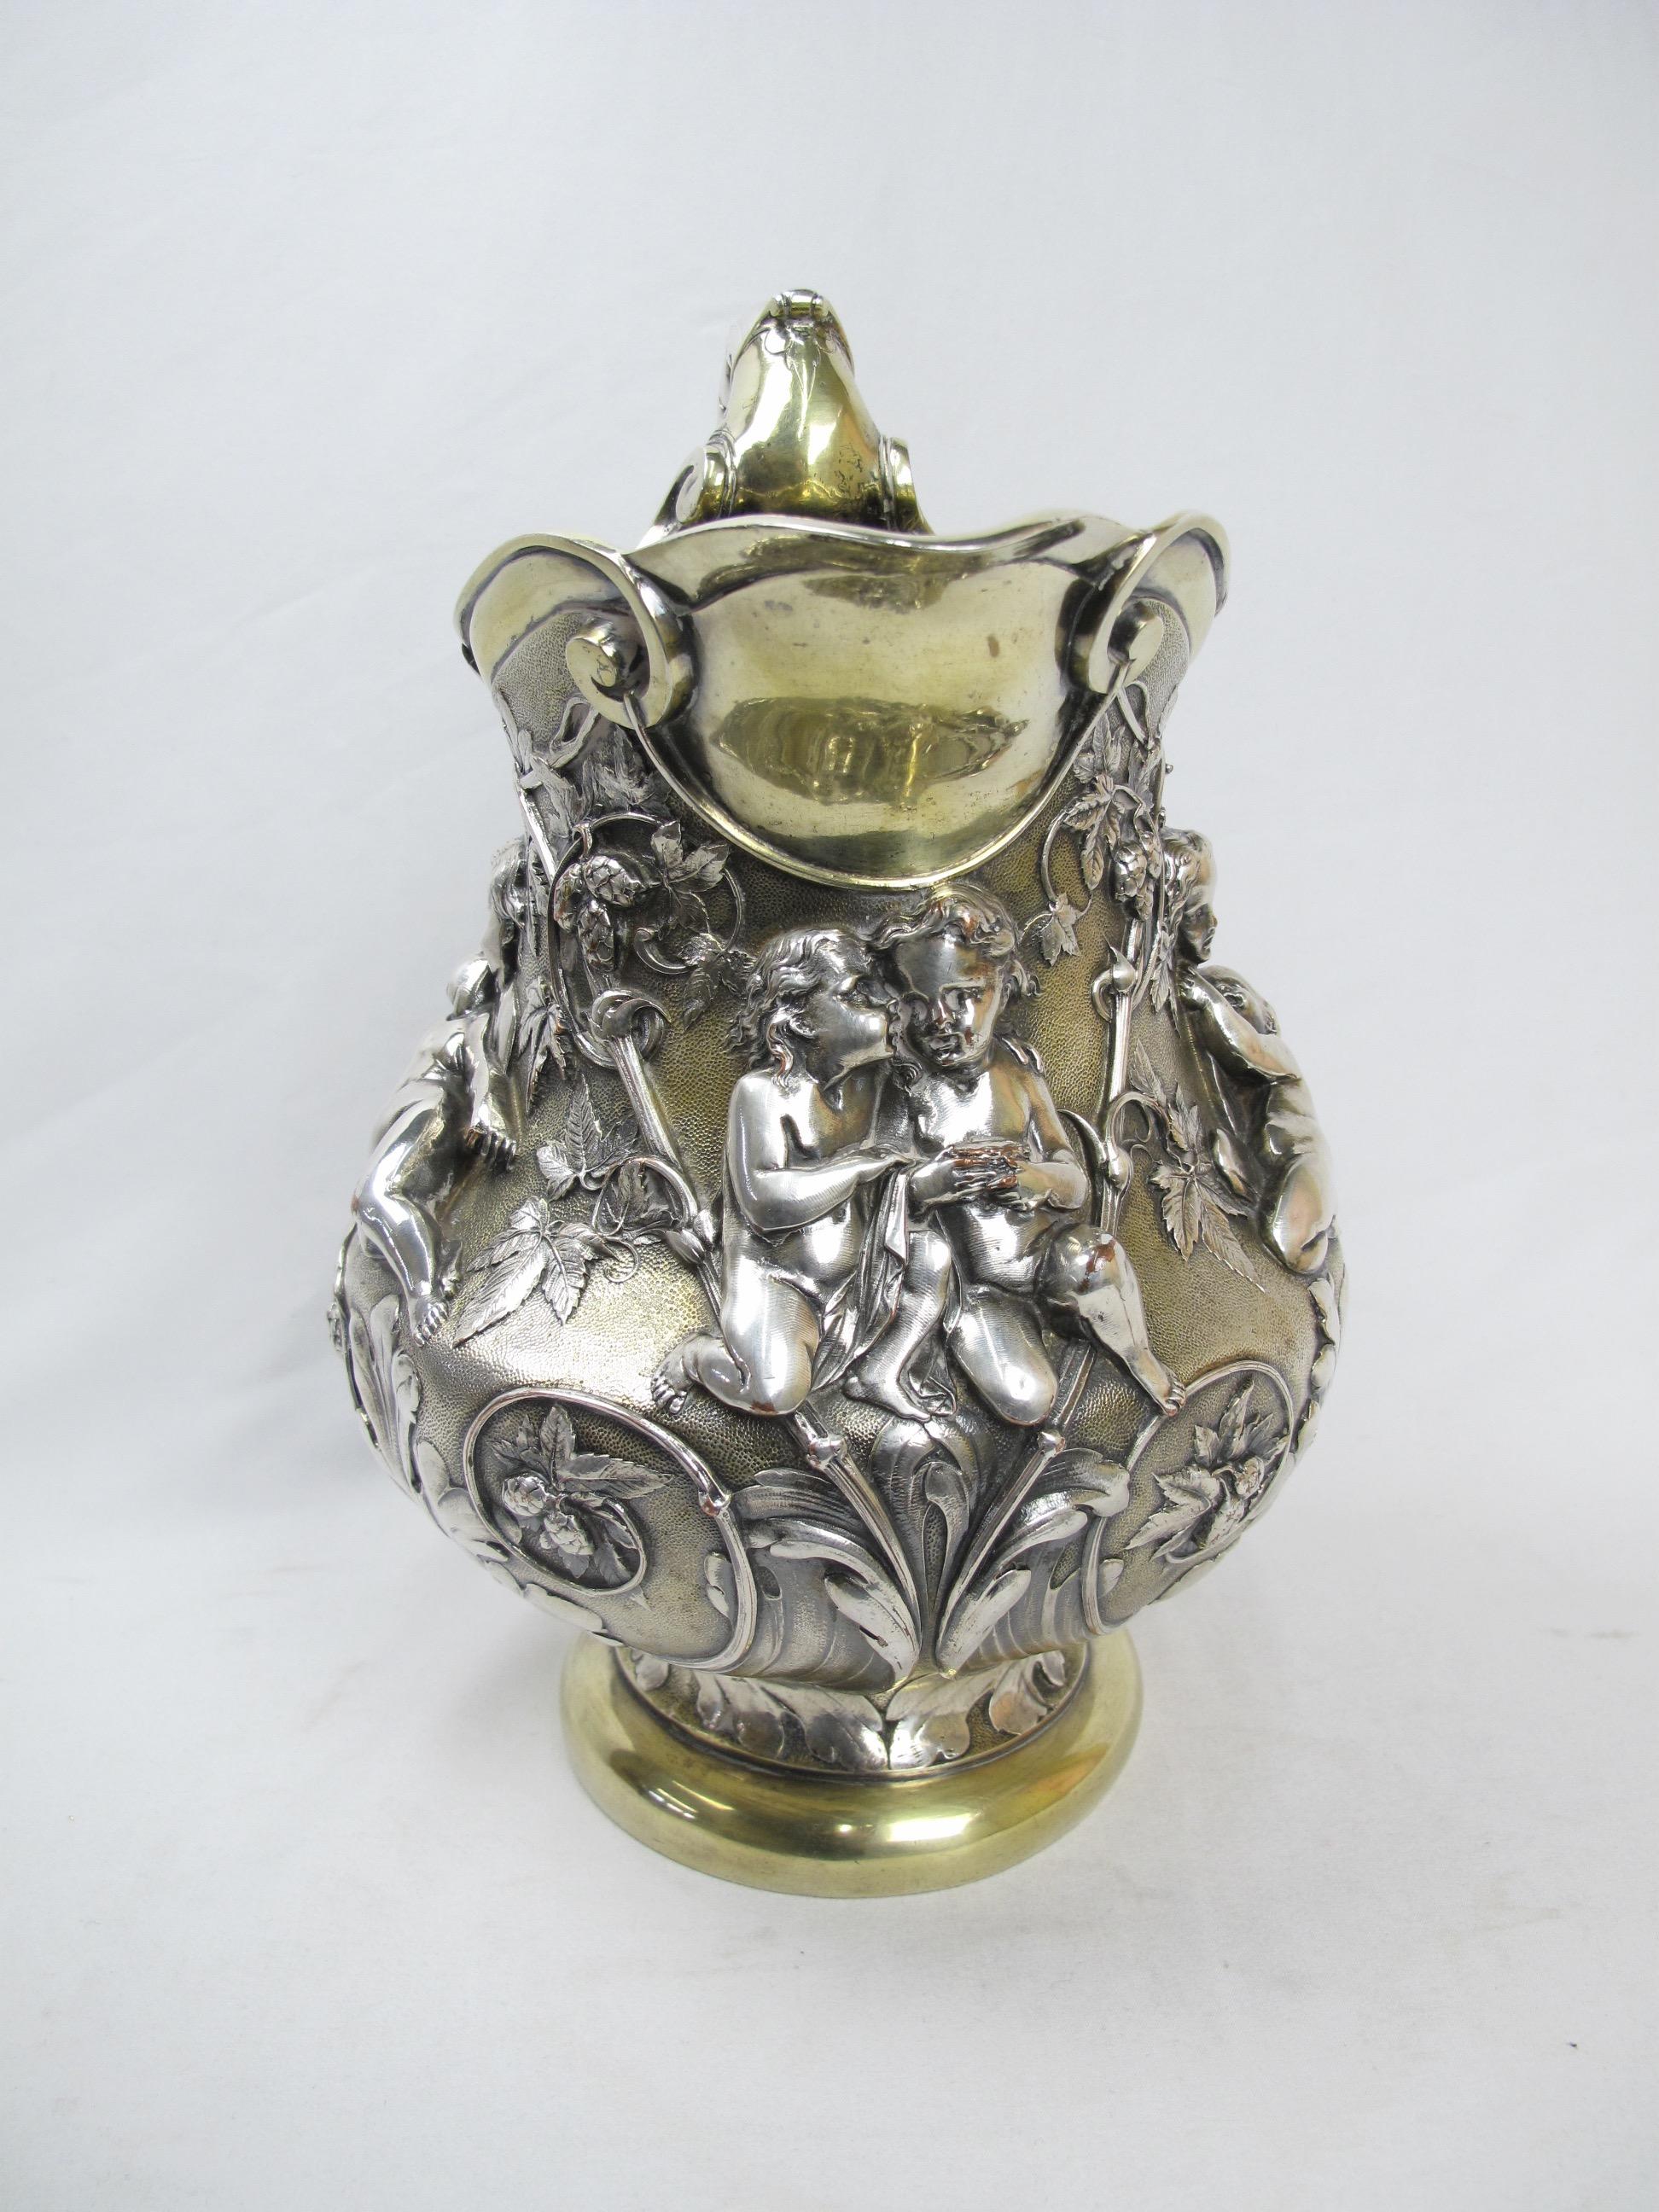 Large Elkington repousse silver-plate pitcher featuring four 'scenes' with putti (a representation of a naked child, especially a cherub or a cupid) cavorting among laden hop vines and leaves. Silver plate with brass brightwork over copper and a